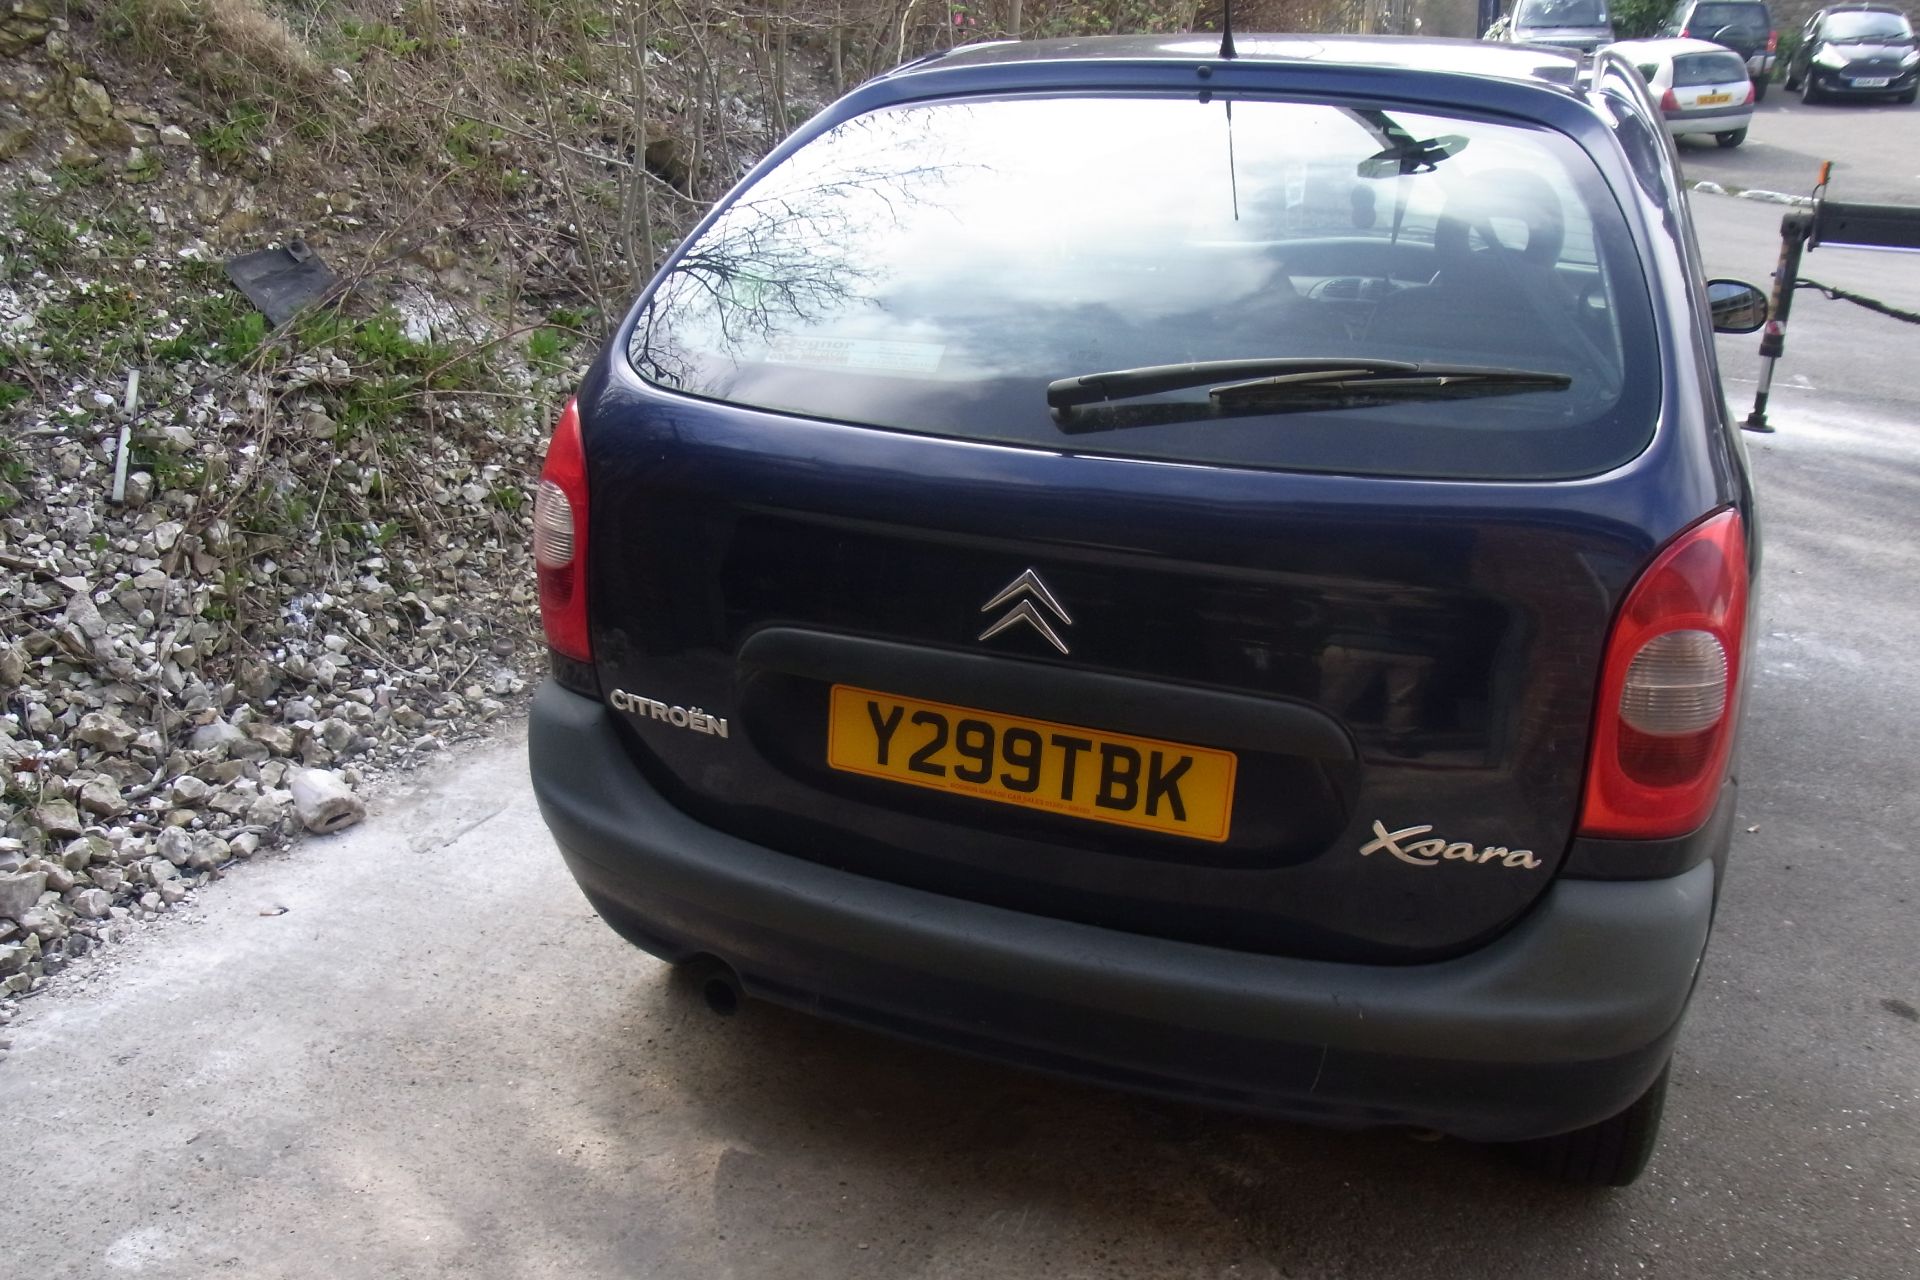 Y299 TBK Citroen Xsara Picasso SX HDI with V5 - No Key - Image 3 of 3